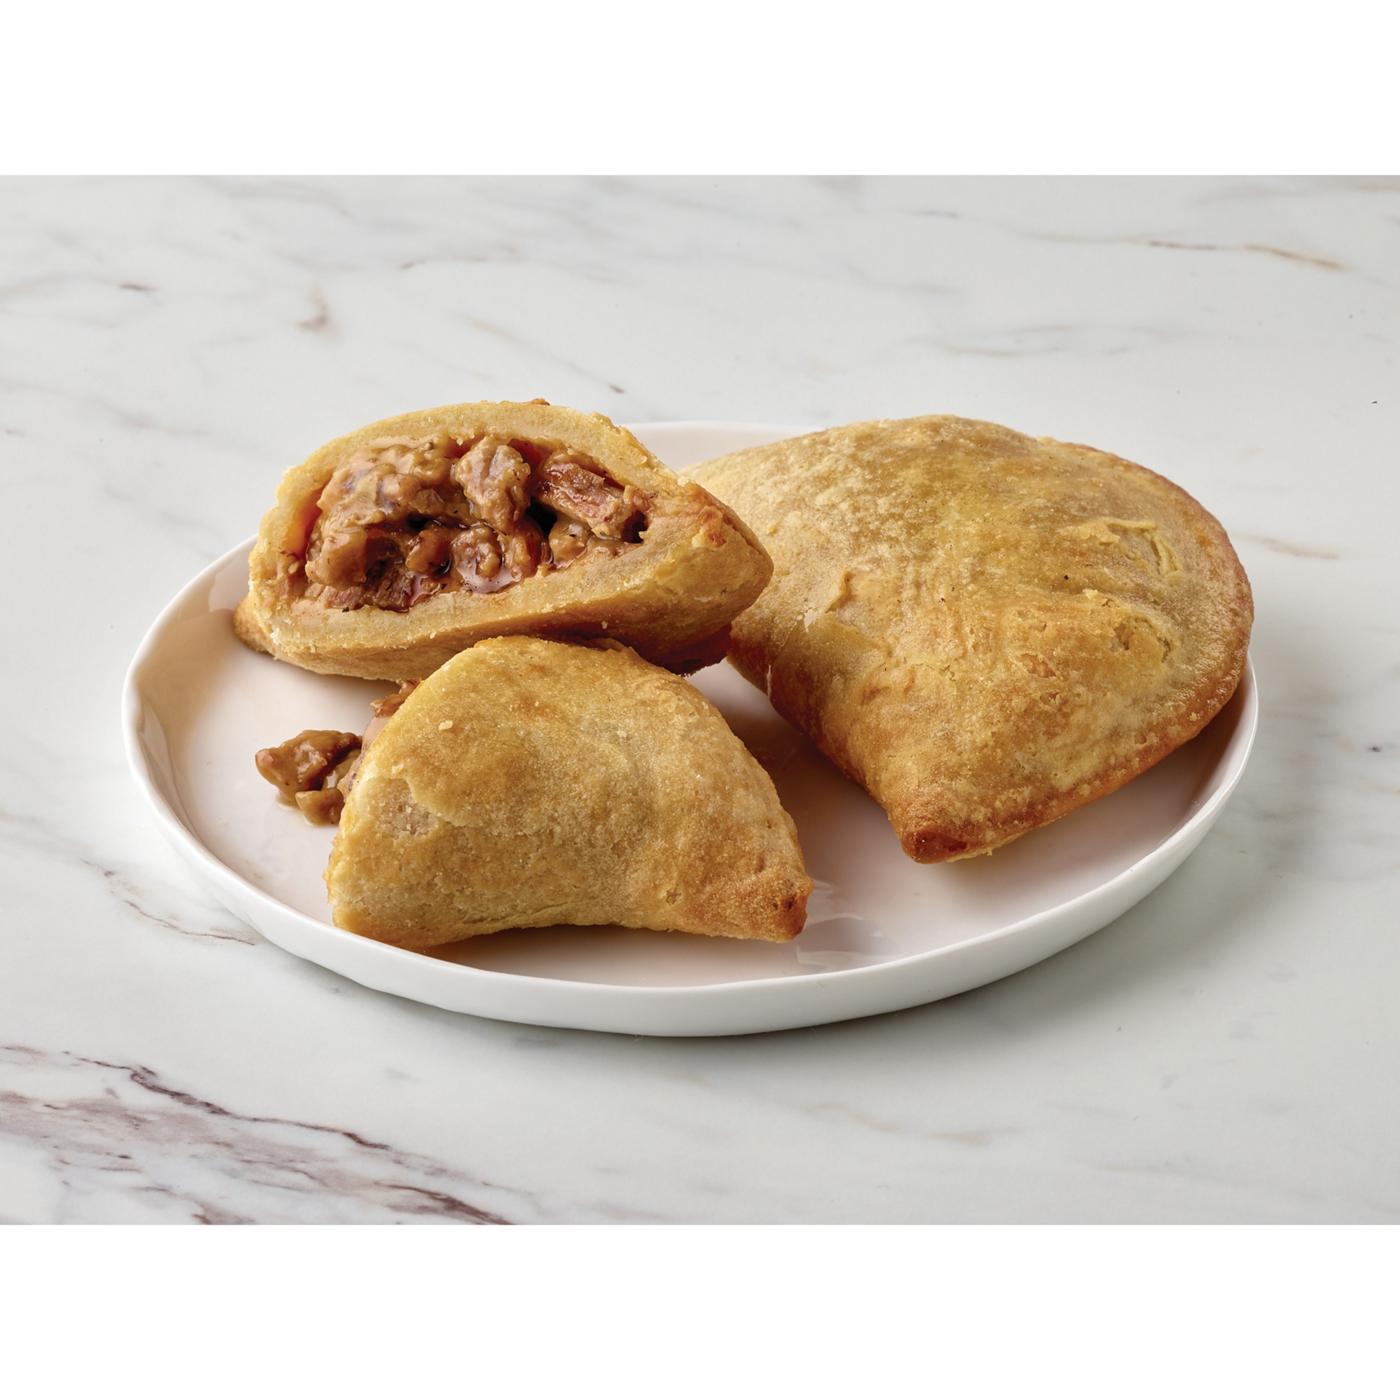 H-E-B Bakery Beef & Cheese Empanadas (Sold Hot); image 2 of 2